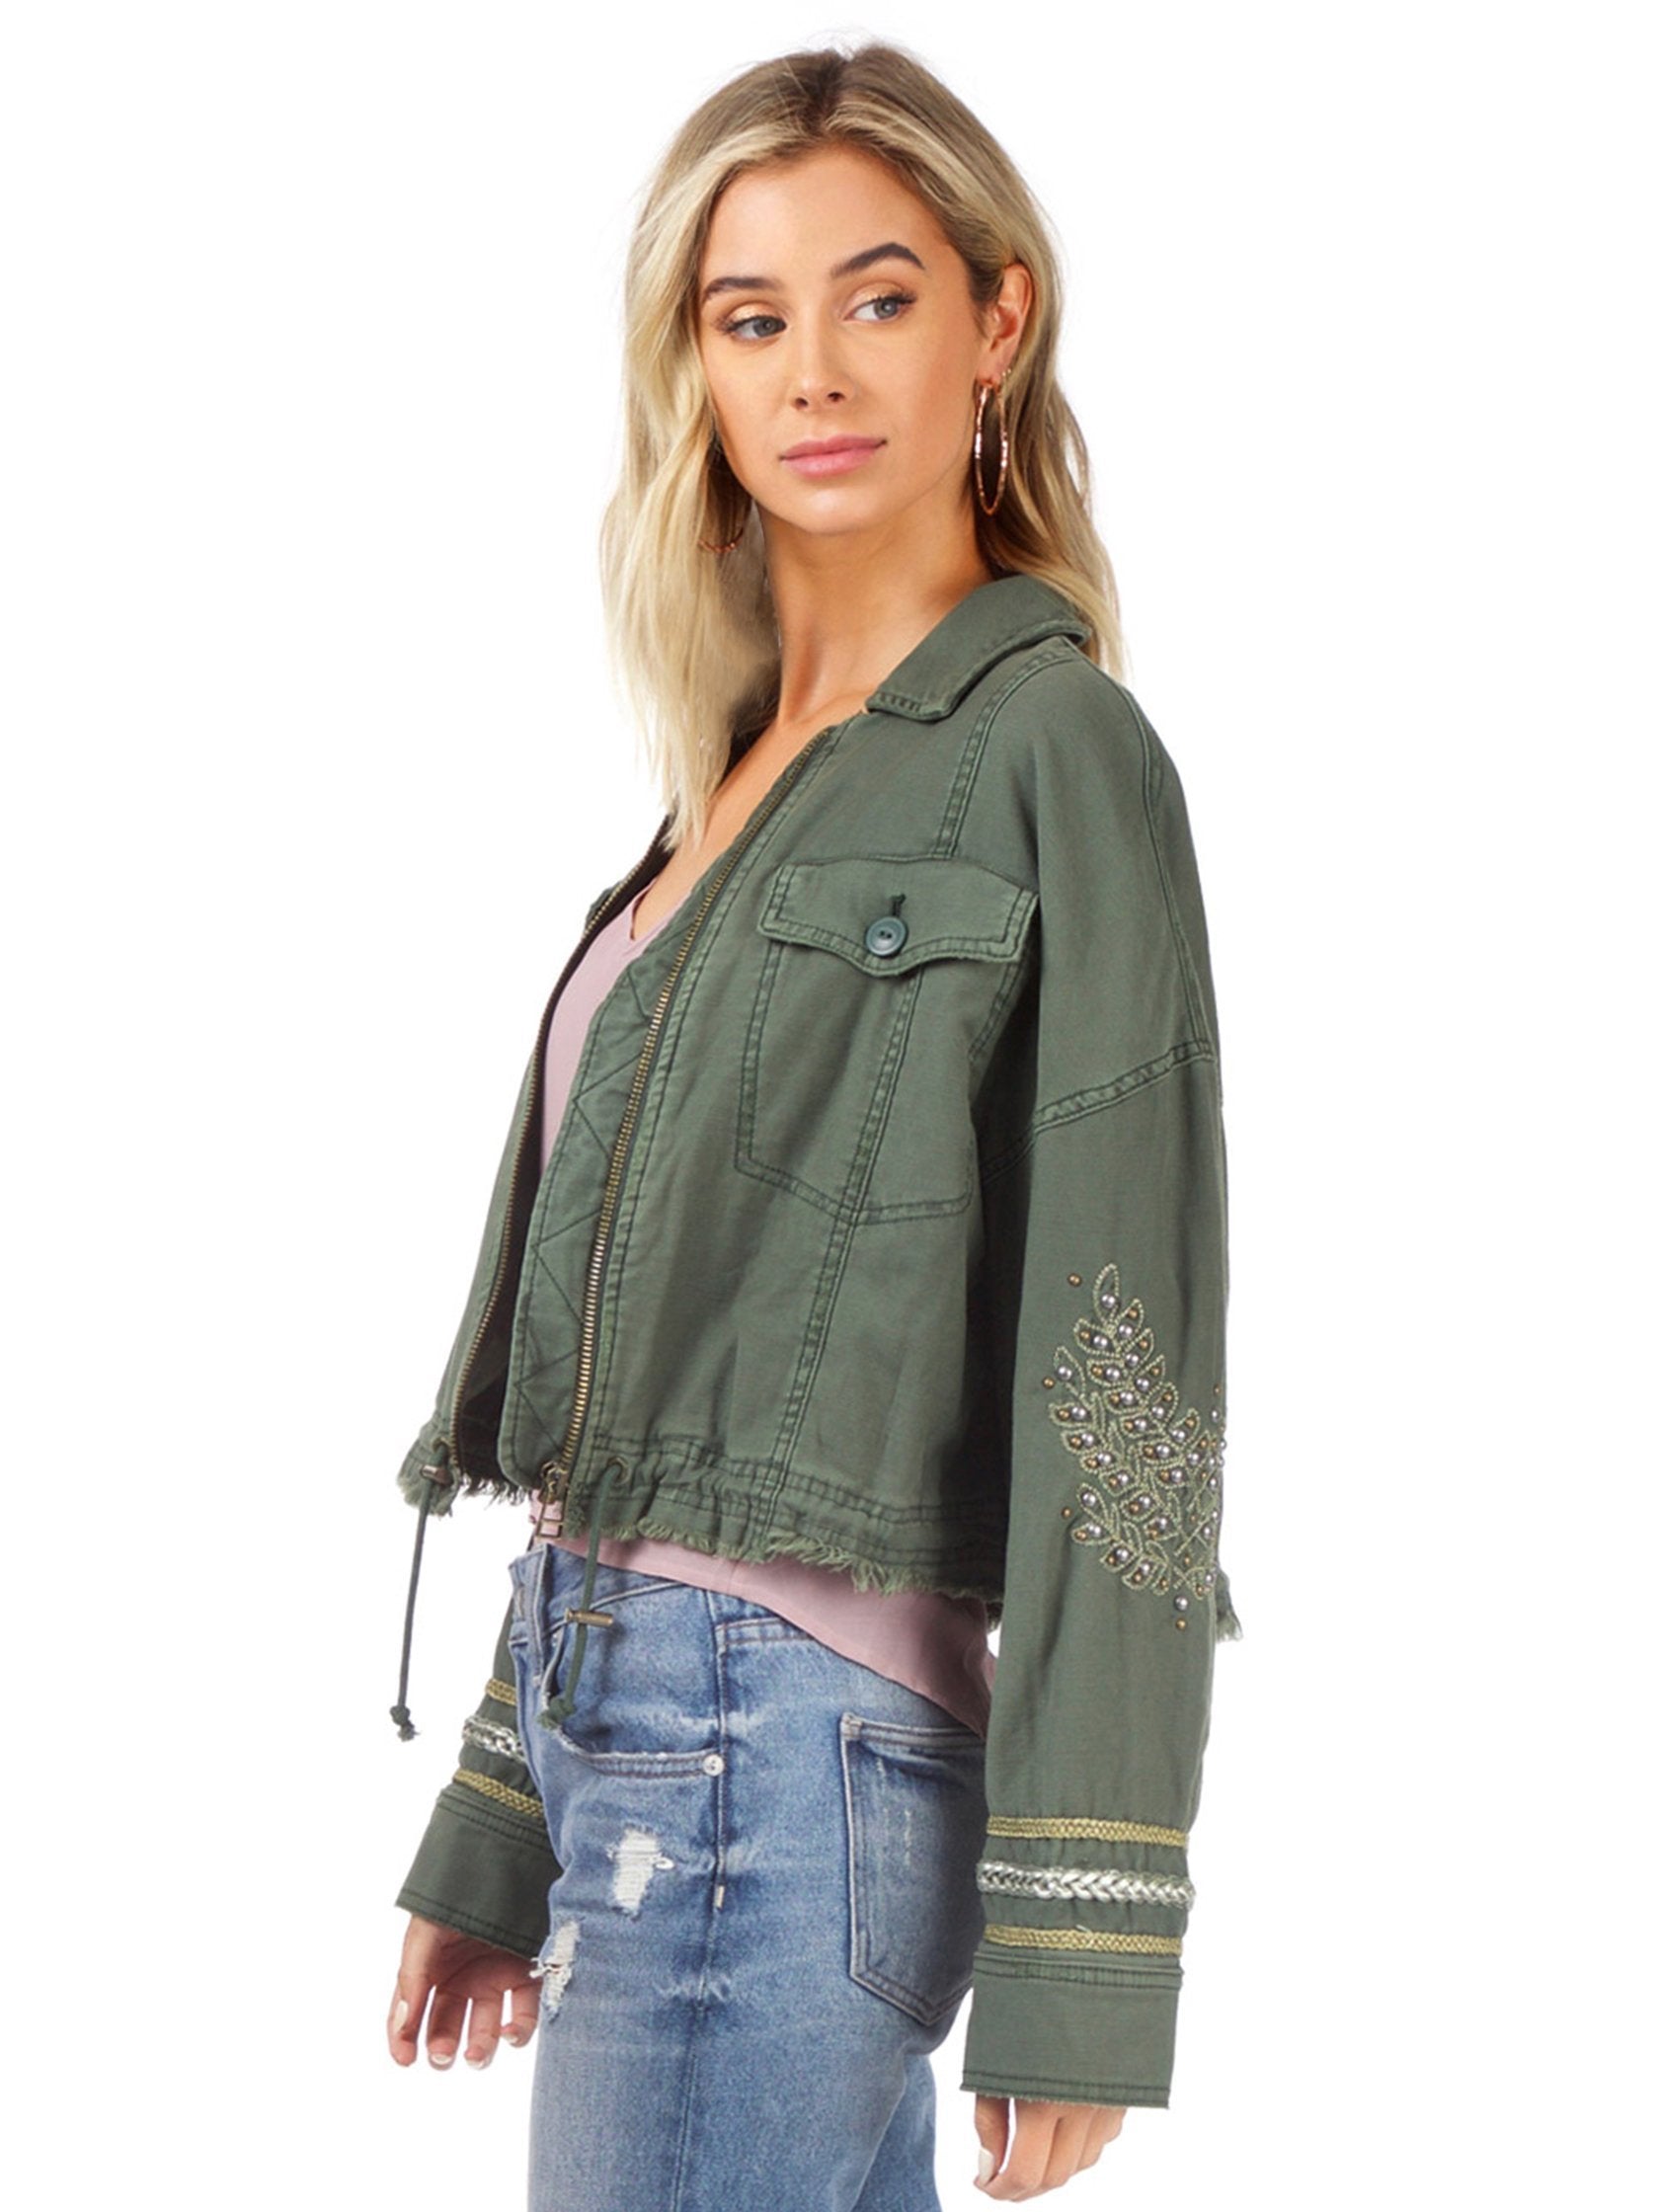 Women wearing a jacket rental from Free People called Extreme Cropped Military Jacket